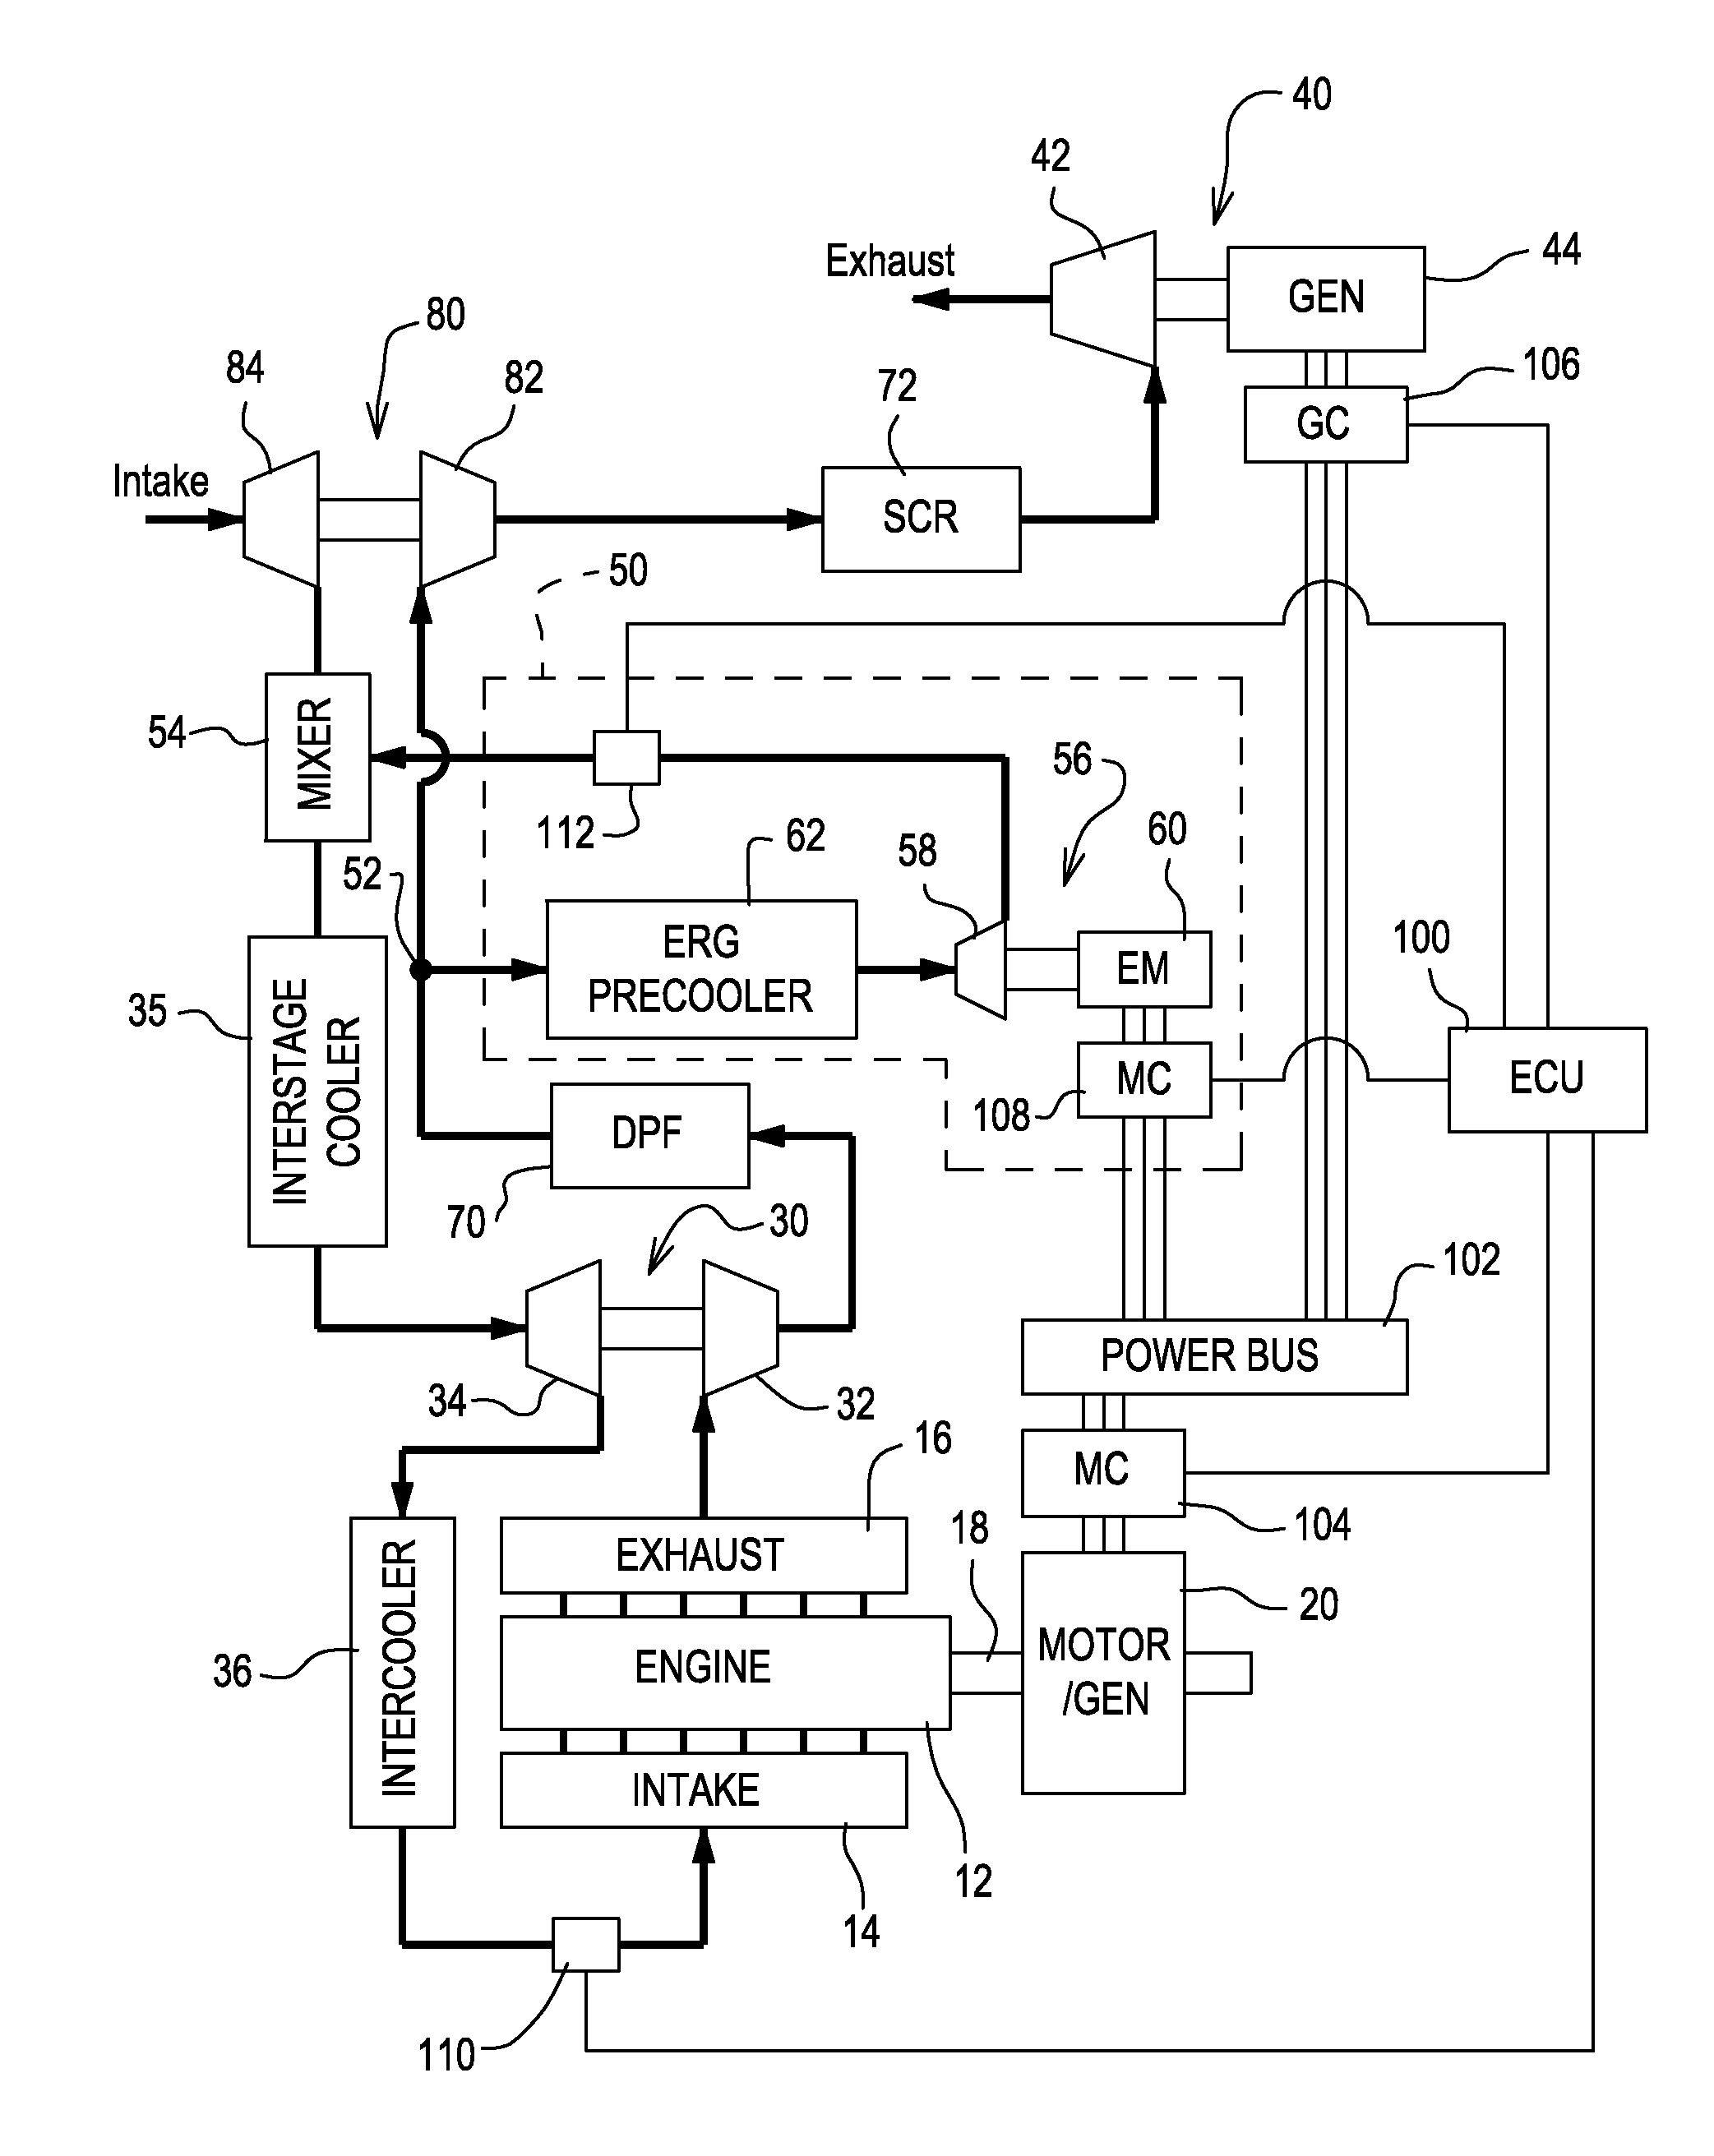 Interstage exhaust gas recirculation system for a dual turbocharged engine having a turbogenerator system